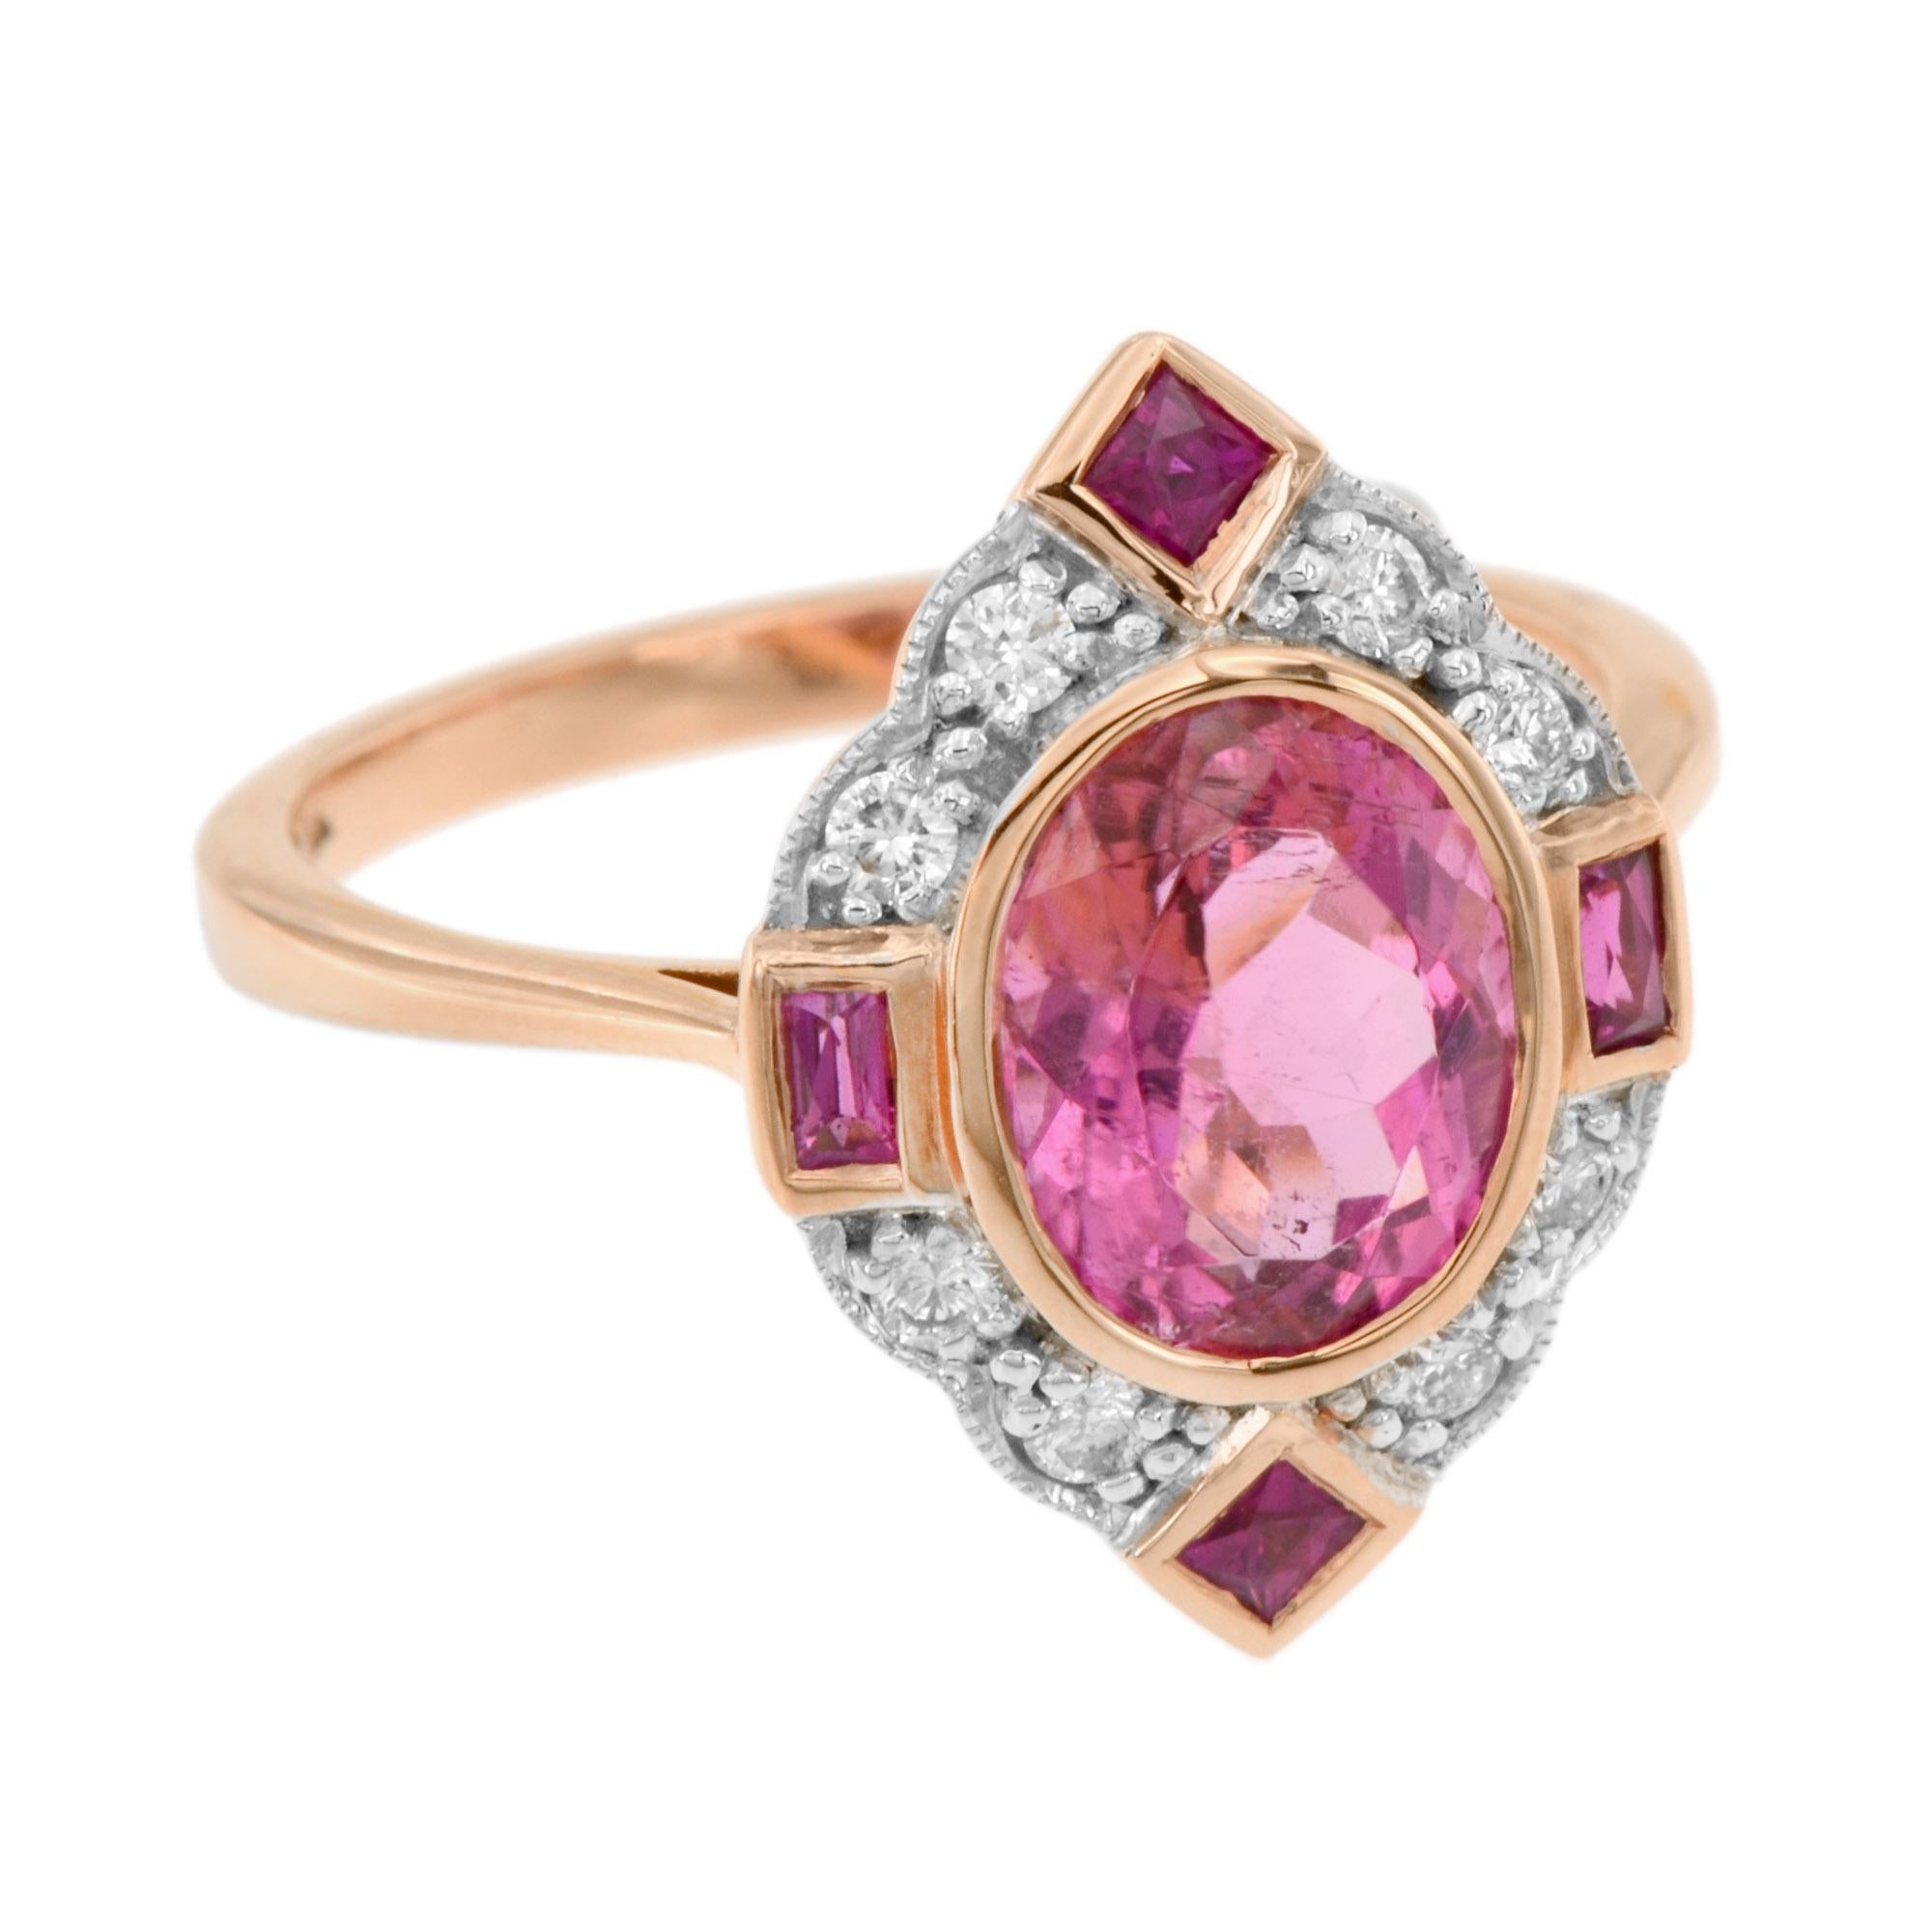 For Sale:  2.20 Ct. Tourmaline Ruby Diamond Vintage Inspired Engagement Ring in 14K Gold 3